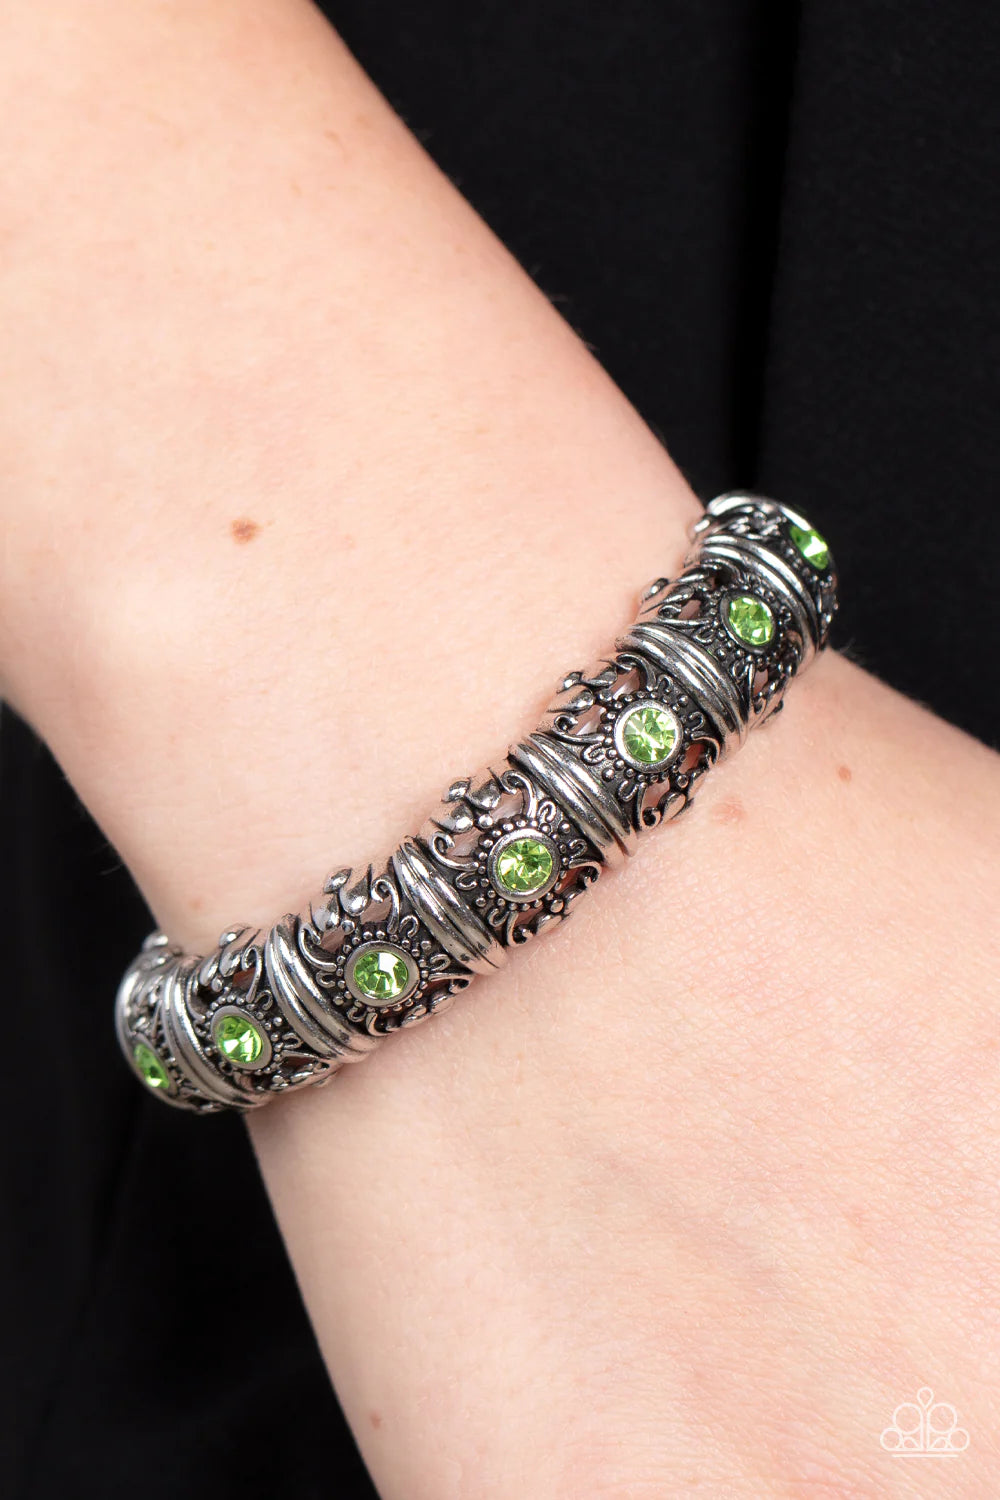 Paparazzi Accessories Ageless Glow - Green Centered around silver intricate, floral casings, green rhinestones glimmer on threaded stretchy bands around the wrist for an ageless look. Sold as one individual bracelet. Jewelry